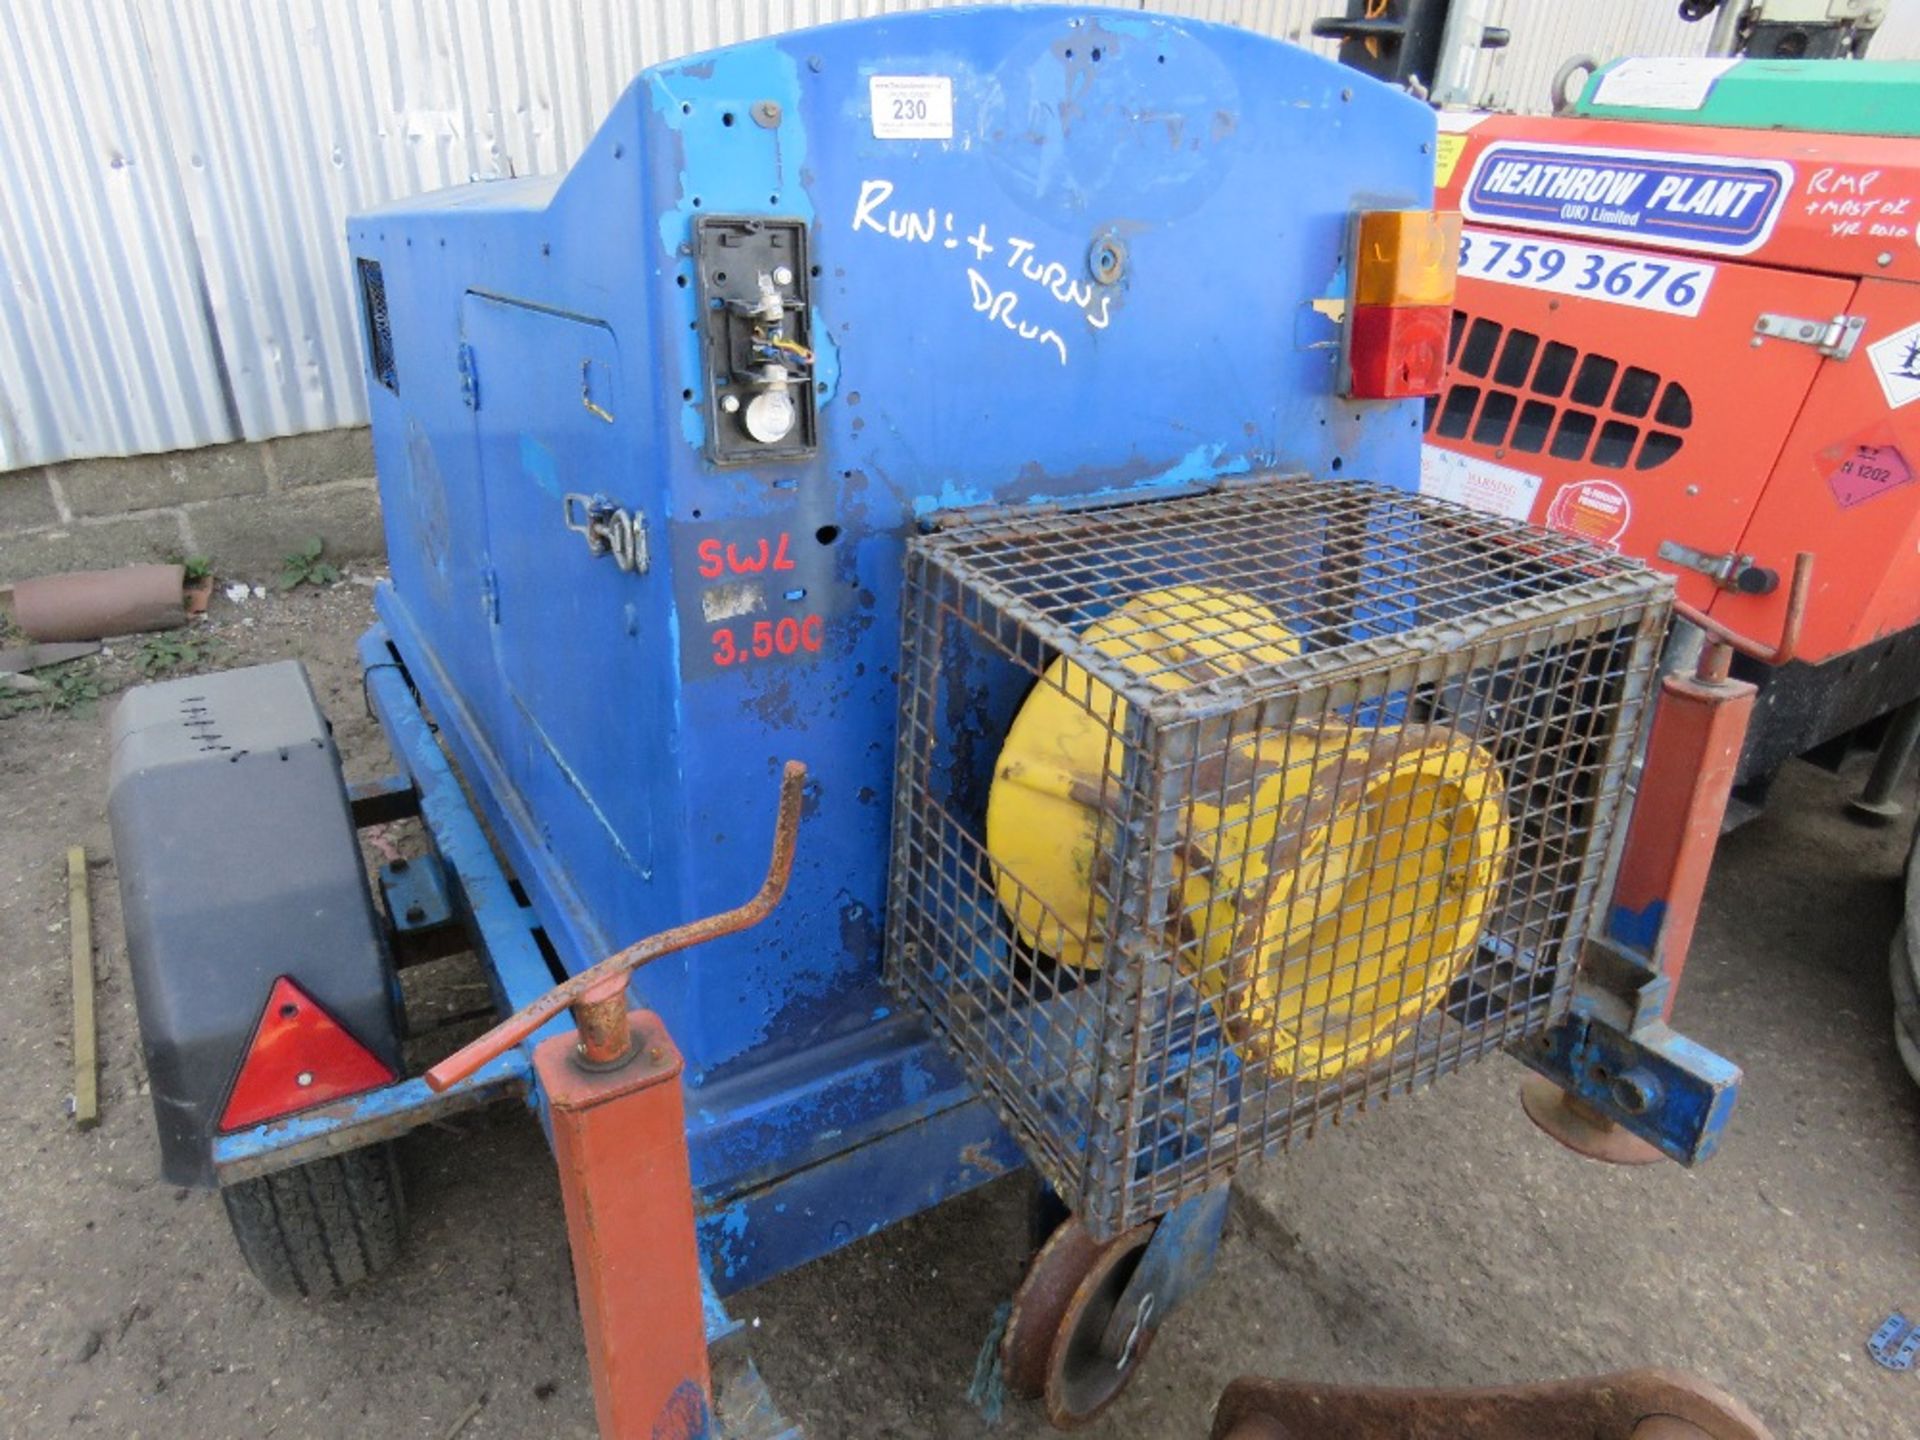 SINGLE AXLED CABLE WINCH UNIT, 1985 REC HRS. PN:T5467 WHEN TESTED WAS SEEN TO START, RUN, DRUM TUR